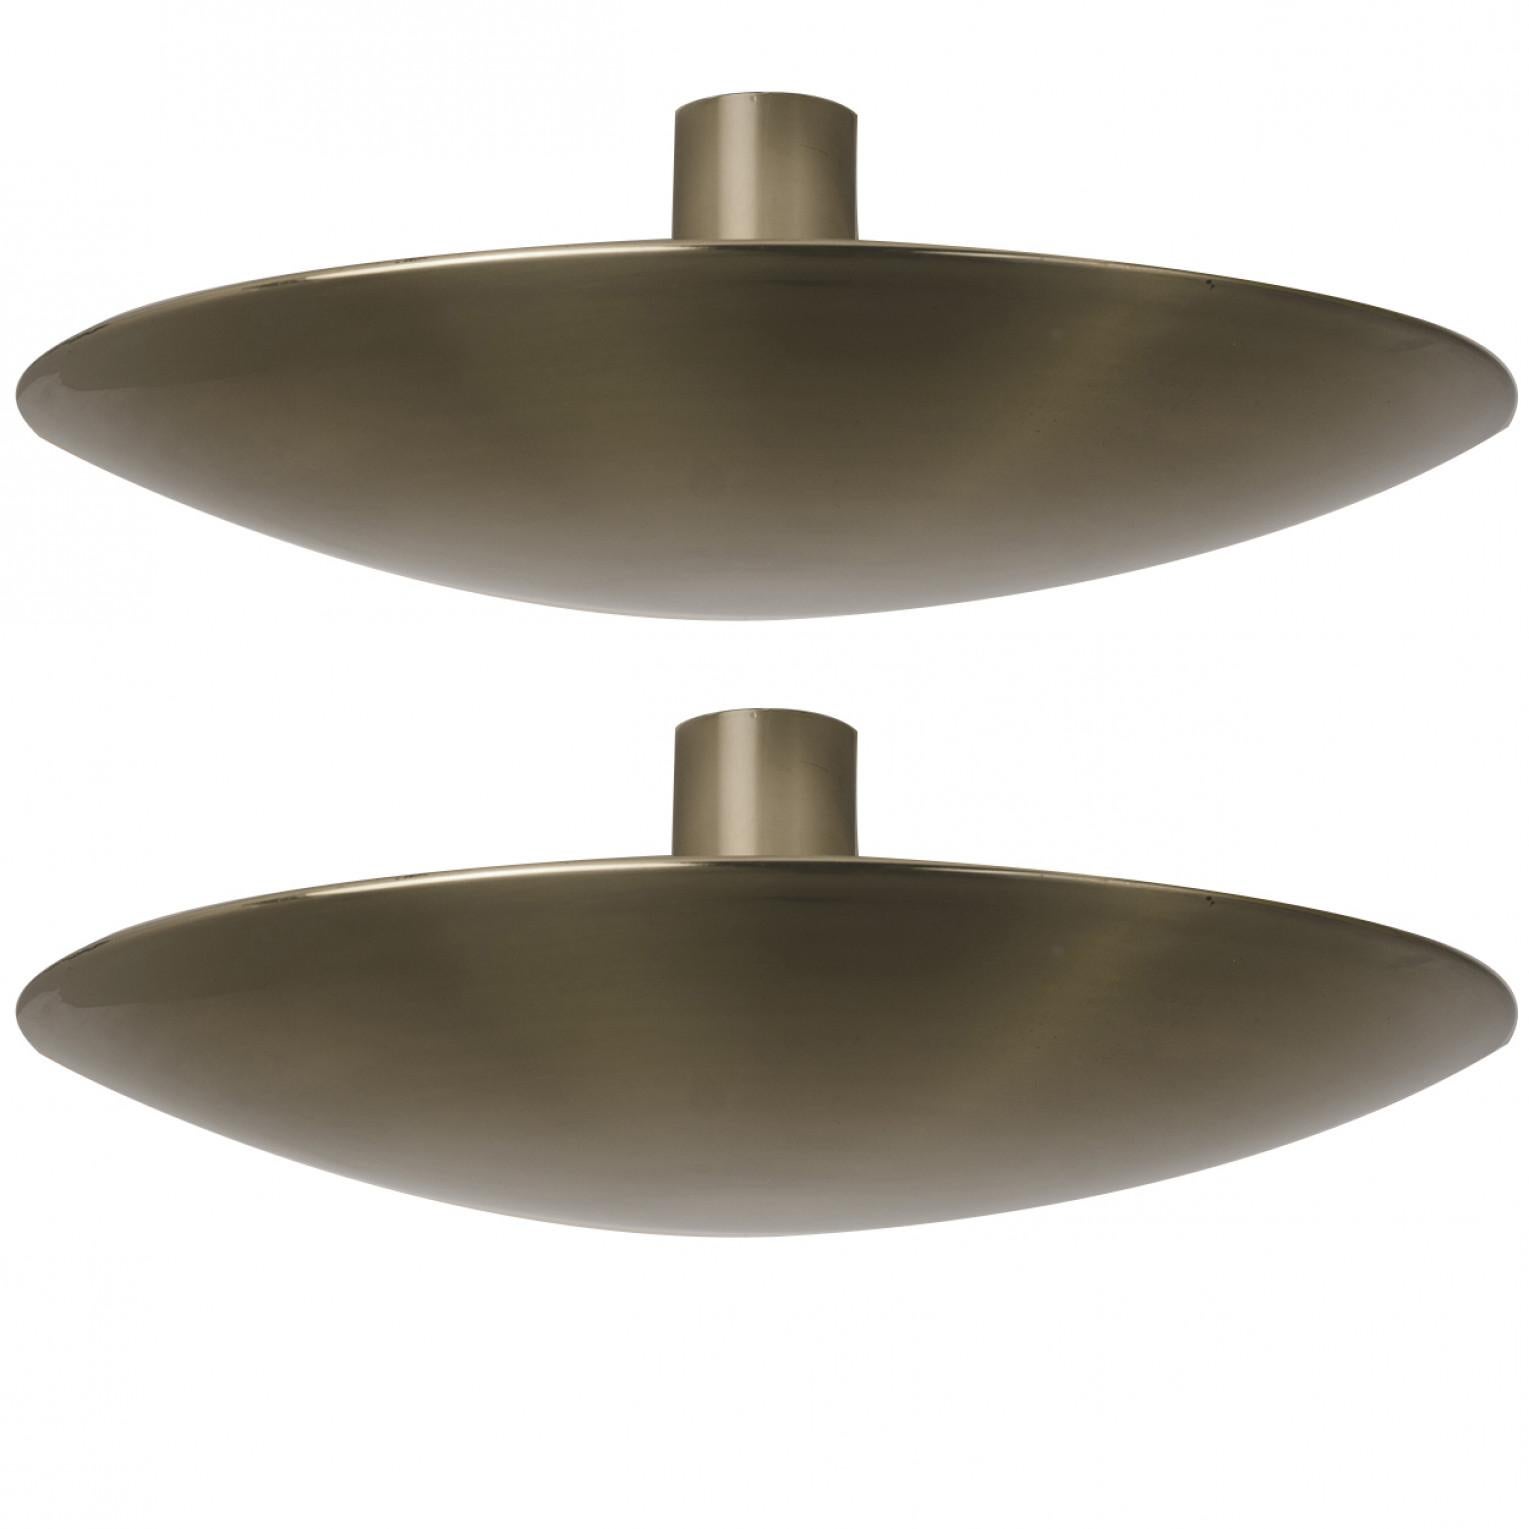 1 of the 2 Florian Schulz Nickel Plated Flush Mount Ceiling / Wall Lights In Good Condition For Sale In Rijssen, NL